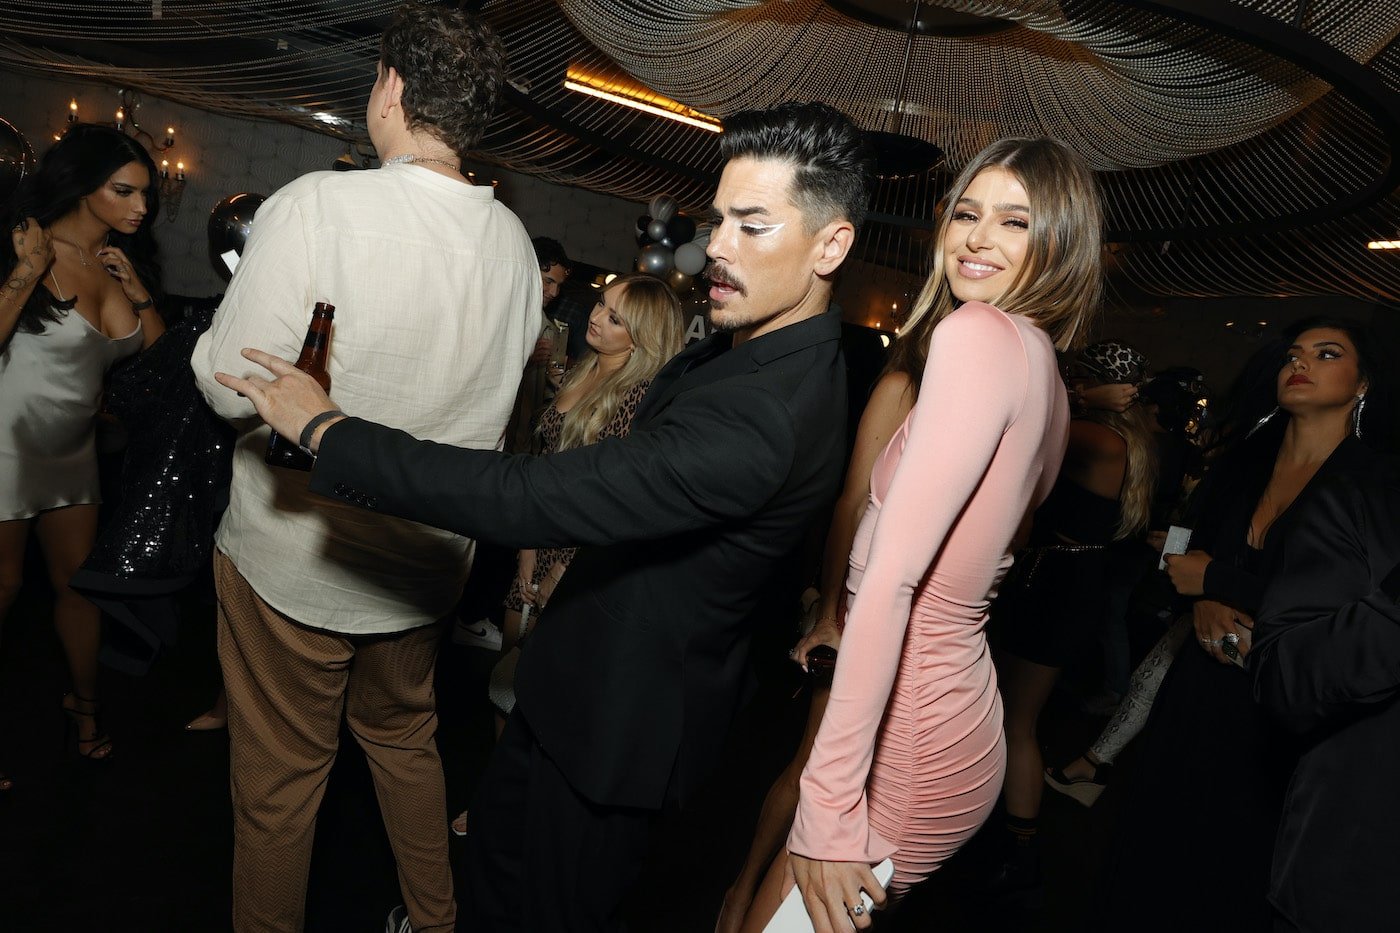 Tom Sandoval and Raquel Leviss from 'Vanderpump Rules' dance closely 